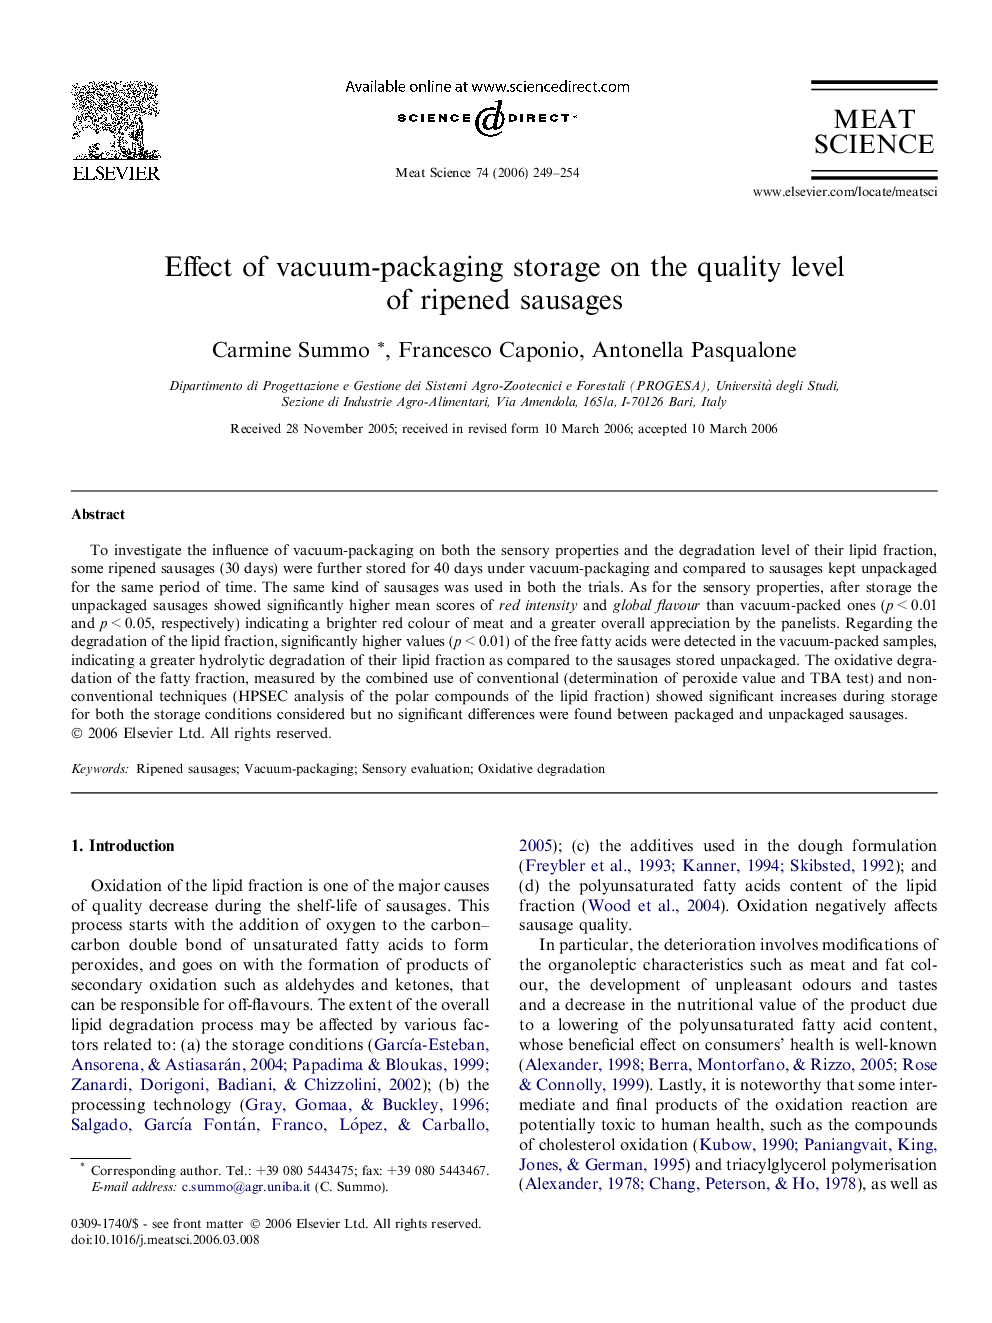 Effect of vacuum-packaging storage on the quality level of ripened sausages